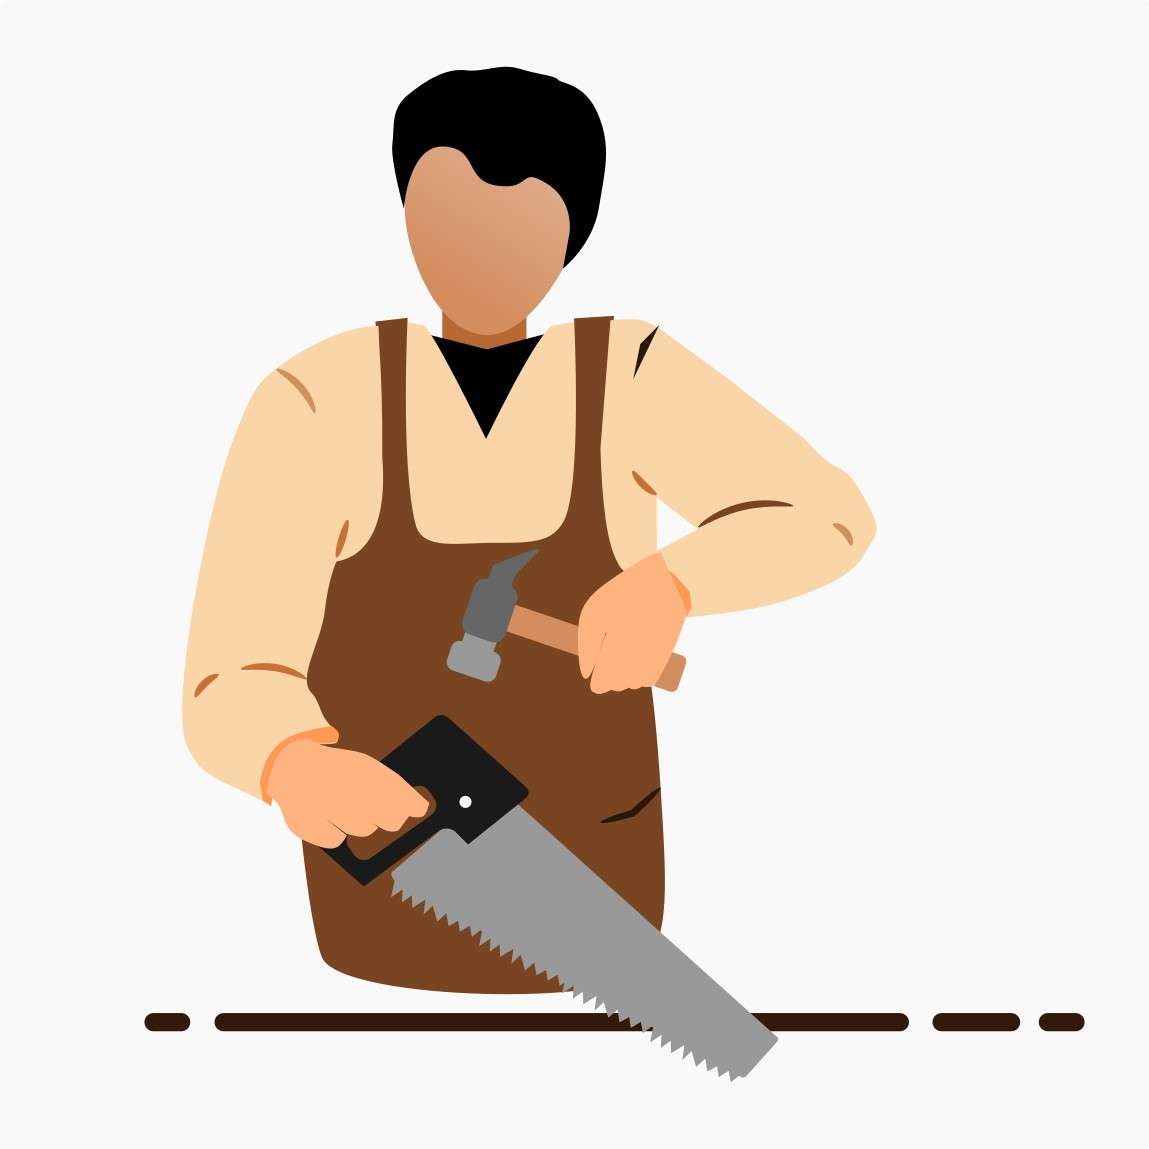 Carpenter with handsaws and hammer cartoon vector